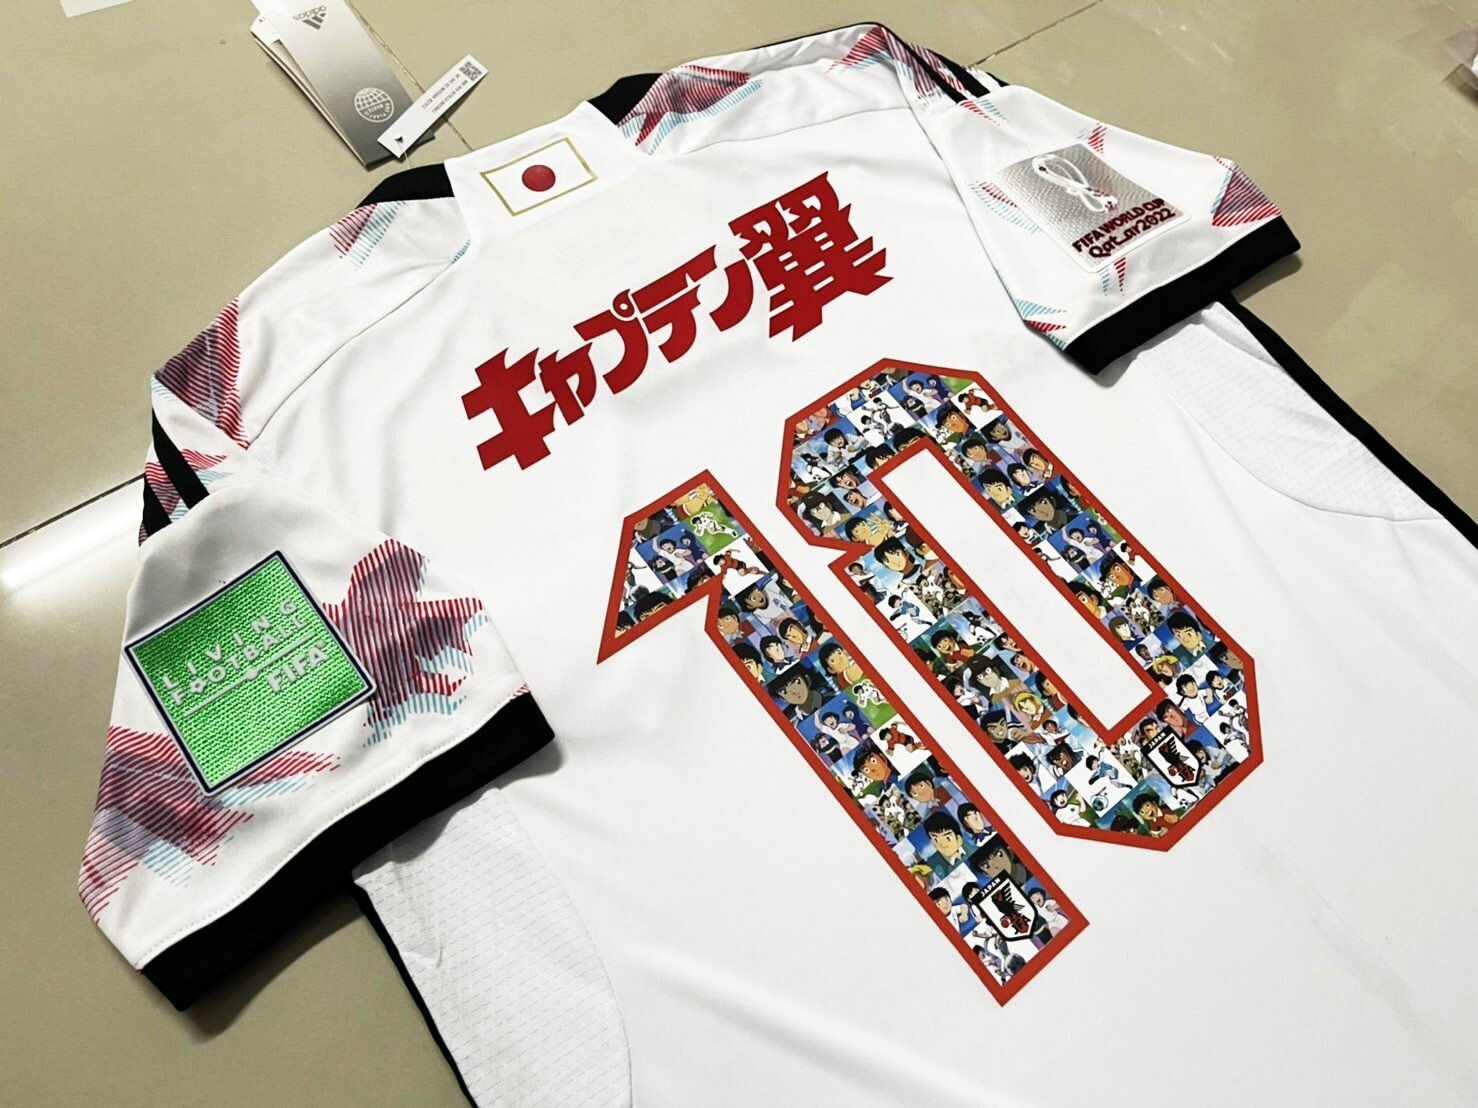 GIAPPONE JAPAN MAGLIA JERSEY CAMISETAS WORLD CUP 2022  player version match